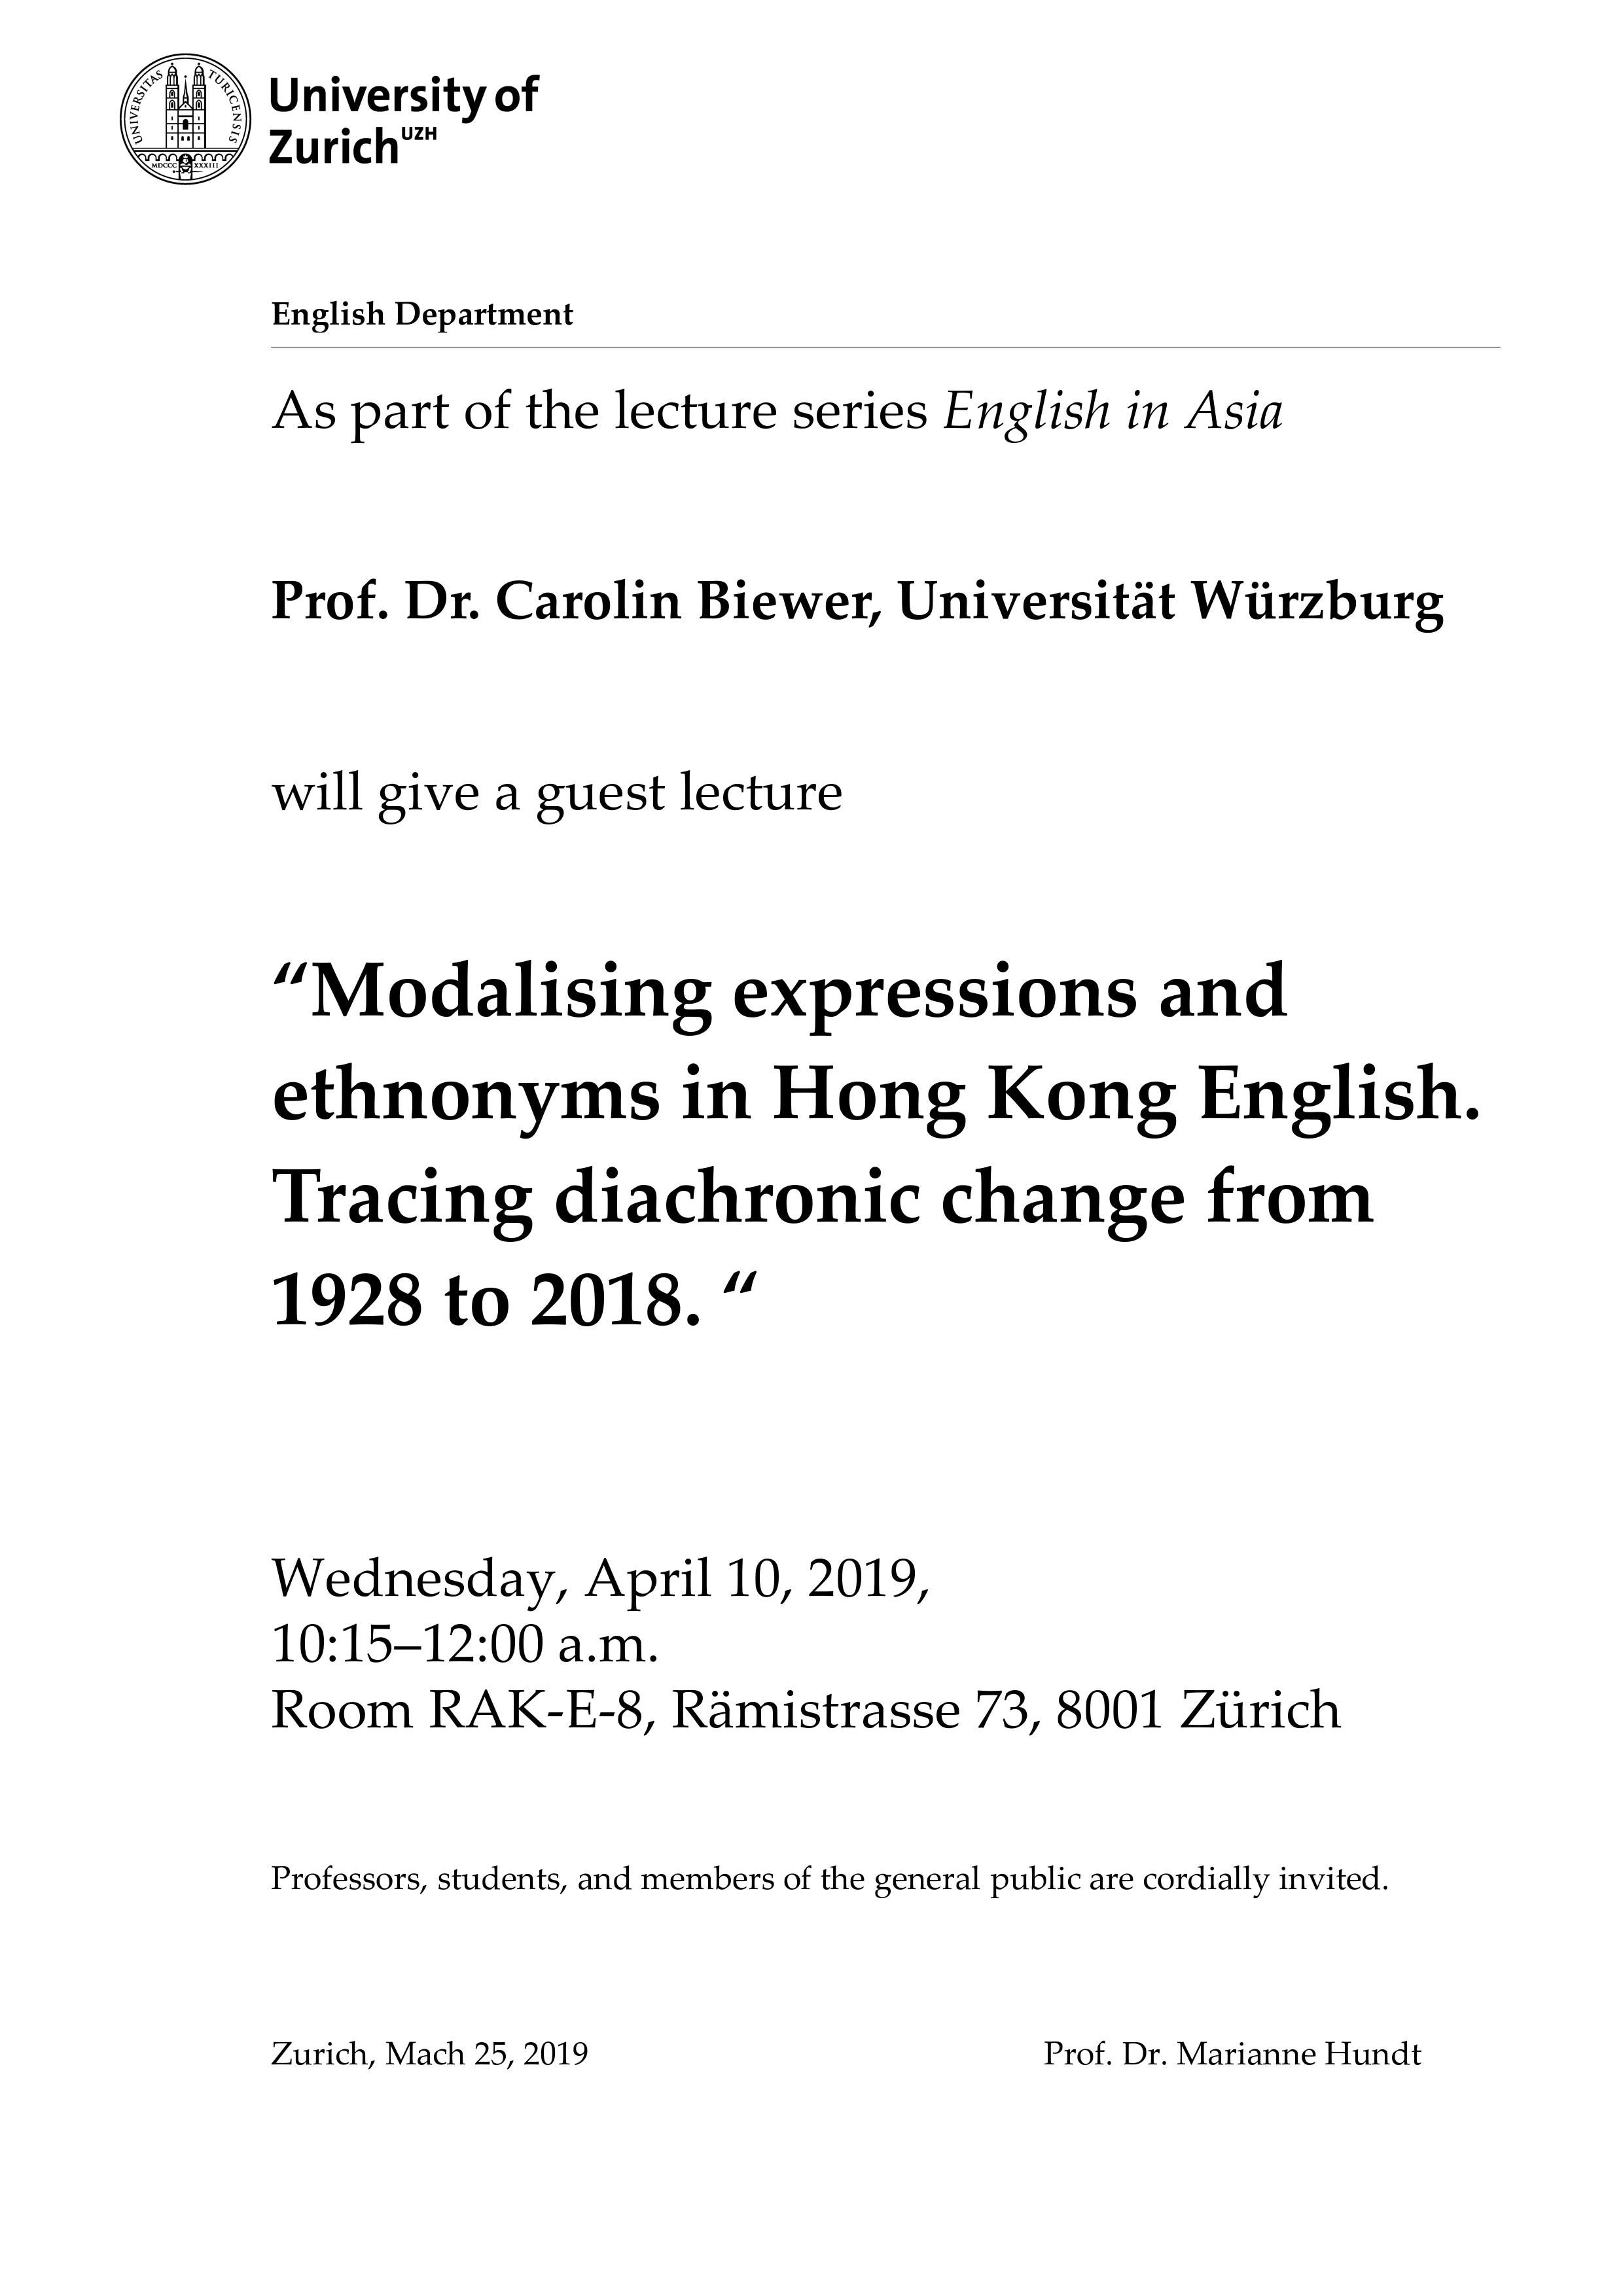 Guest Lecture Carolin Biewer (Universität Würzburg) "Modalising expressions and ethnonyms in Hong Kong English. Tracing diachronic change from 1928 to 2018."